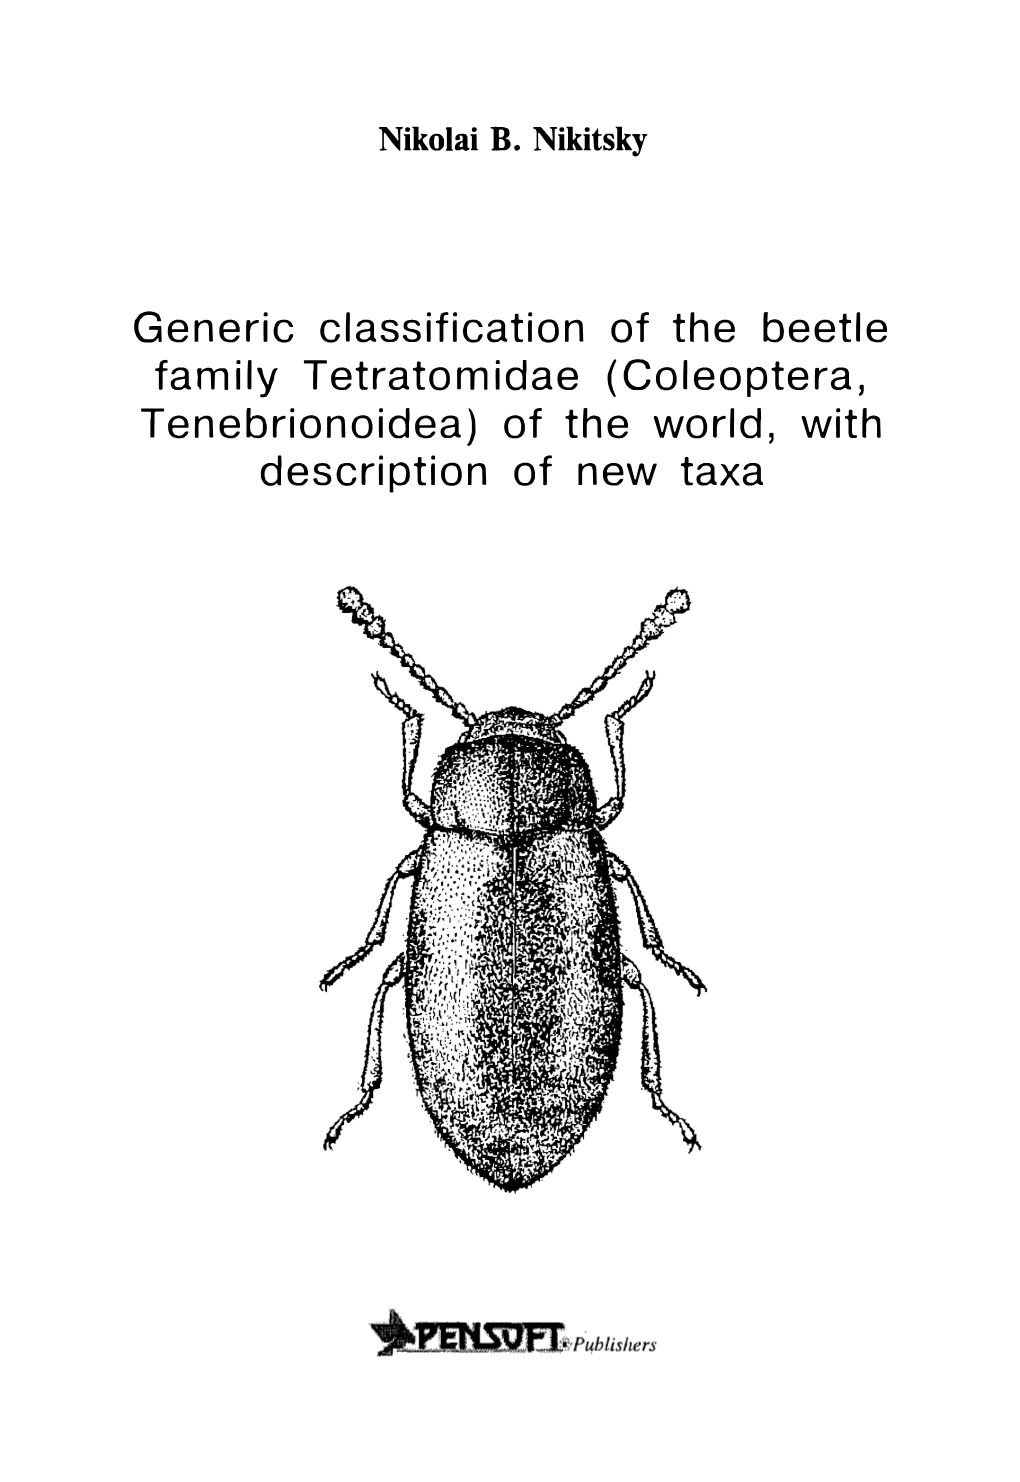 Generic Classification of the Beetle Family Tetratomidae (Coleoptera, Tenebrionoidea) of the World, with Description of New Taxa